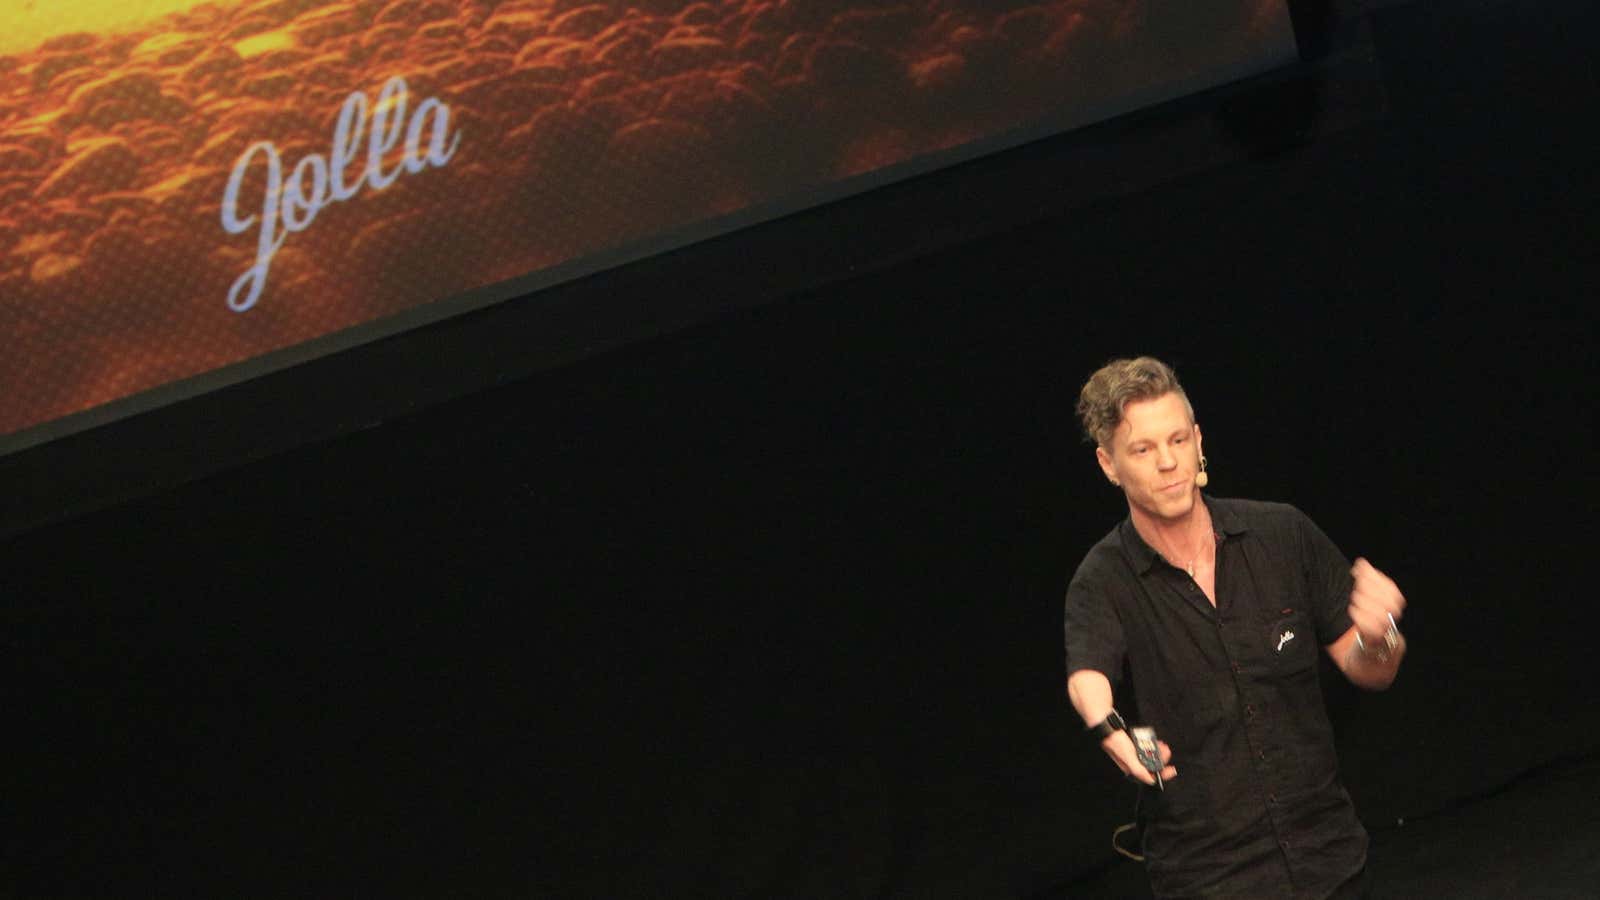 His team is building “a movement,” and not just a mobile OS, says Mark Dillon, CEO and co-founder of Jolla